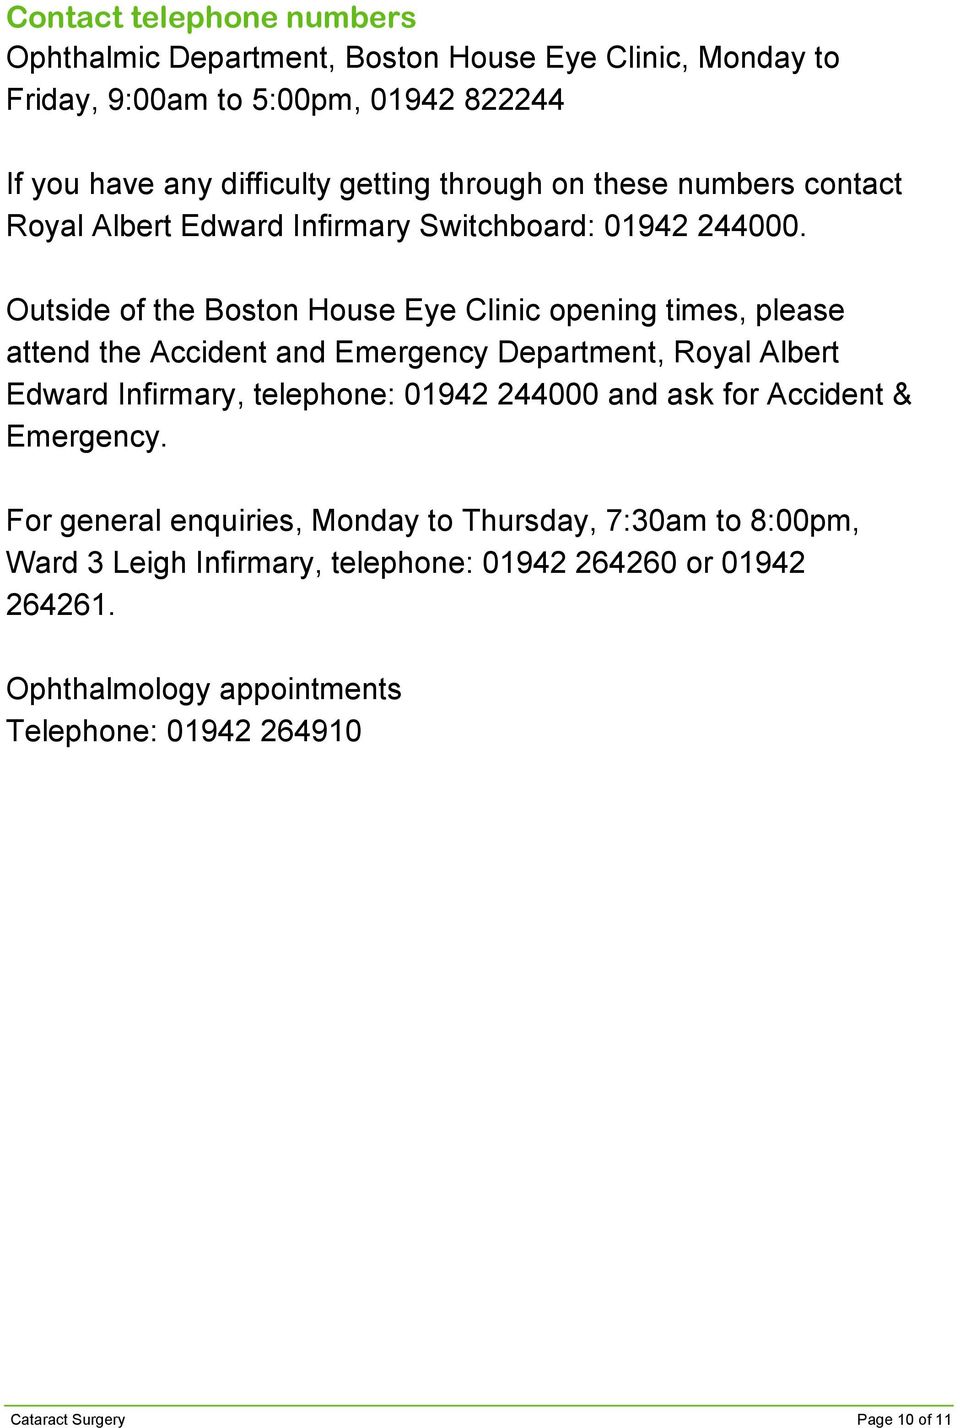 Outside of the Boston House Eye Clinic opening times, please attend the Accident and Emergency Department, Royal Albert Edward Infirmary, telephone: 01942 244000